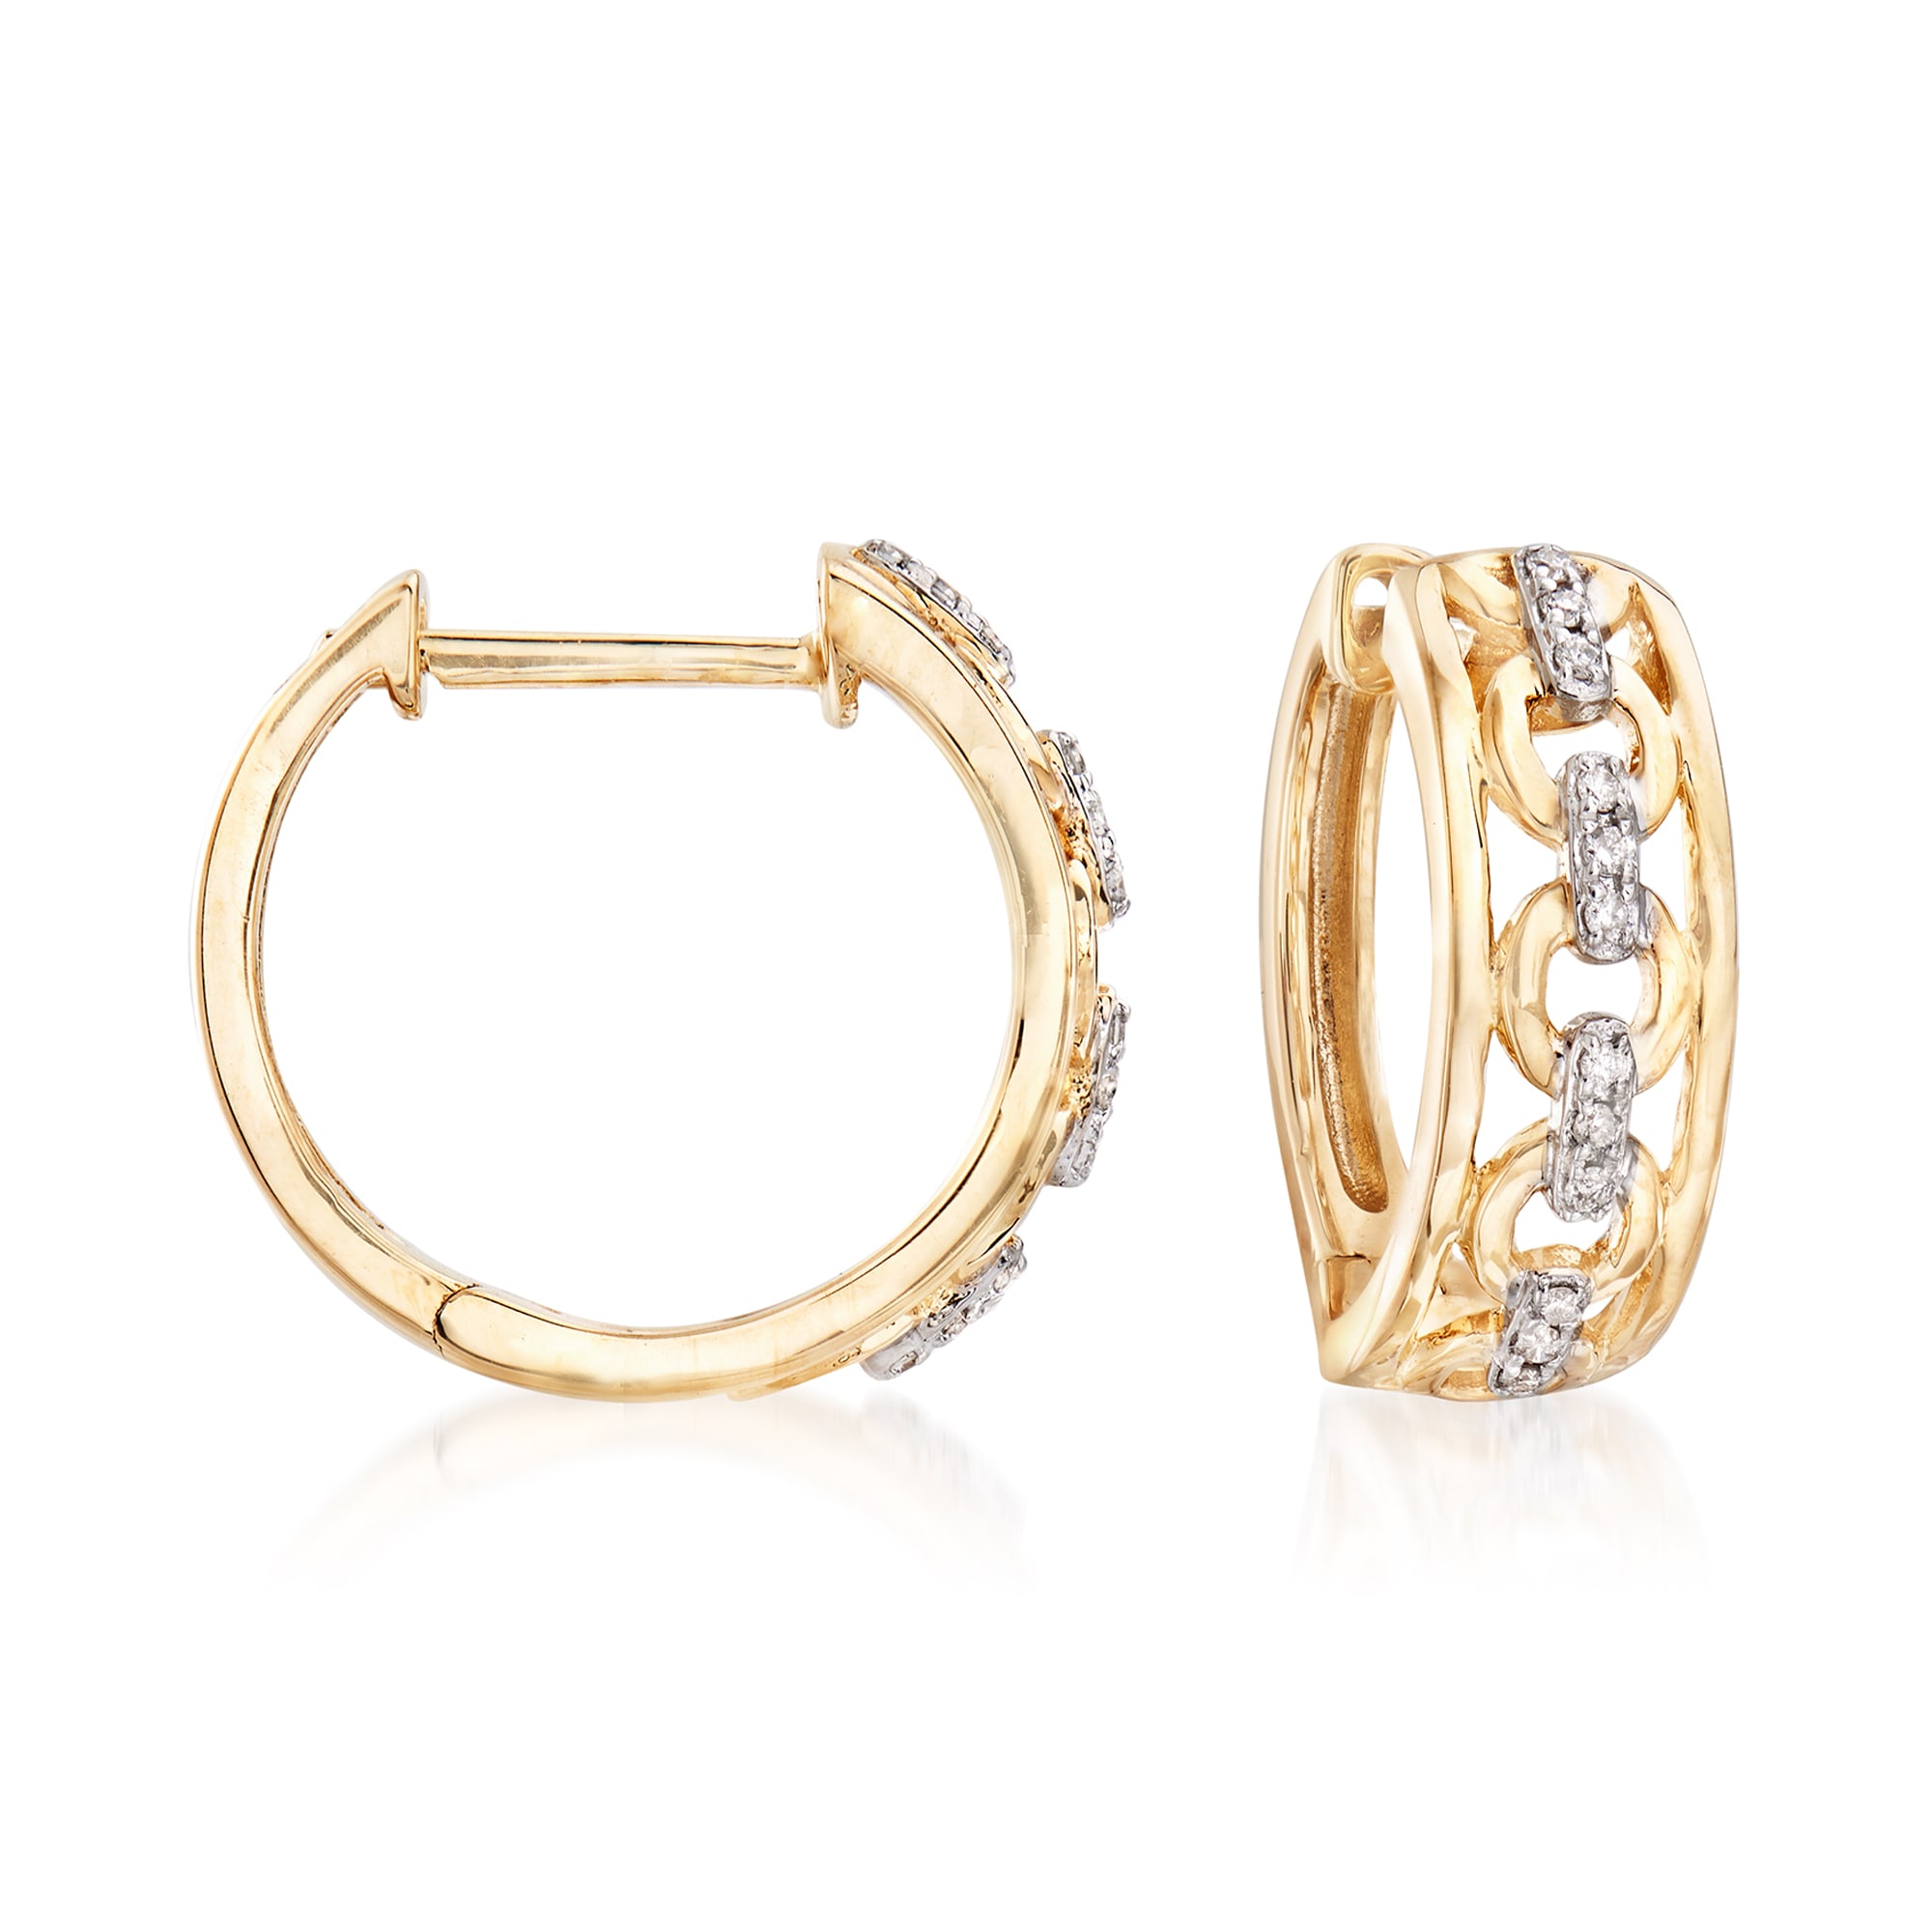 14kt Yellow Gold Openwork Hoop Earrings with Diamond Accents | Ross-Simons